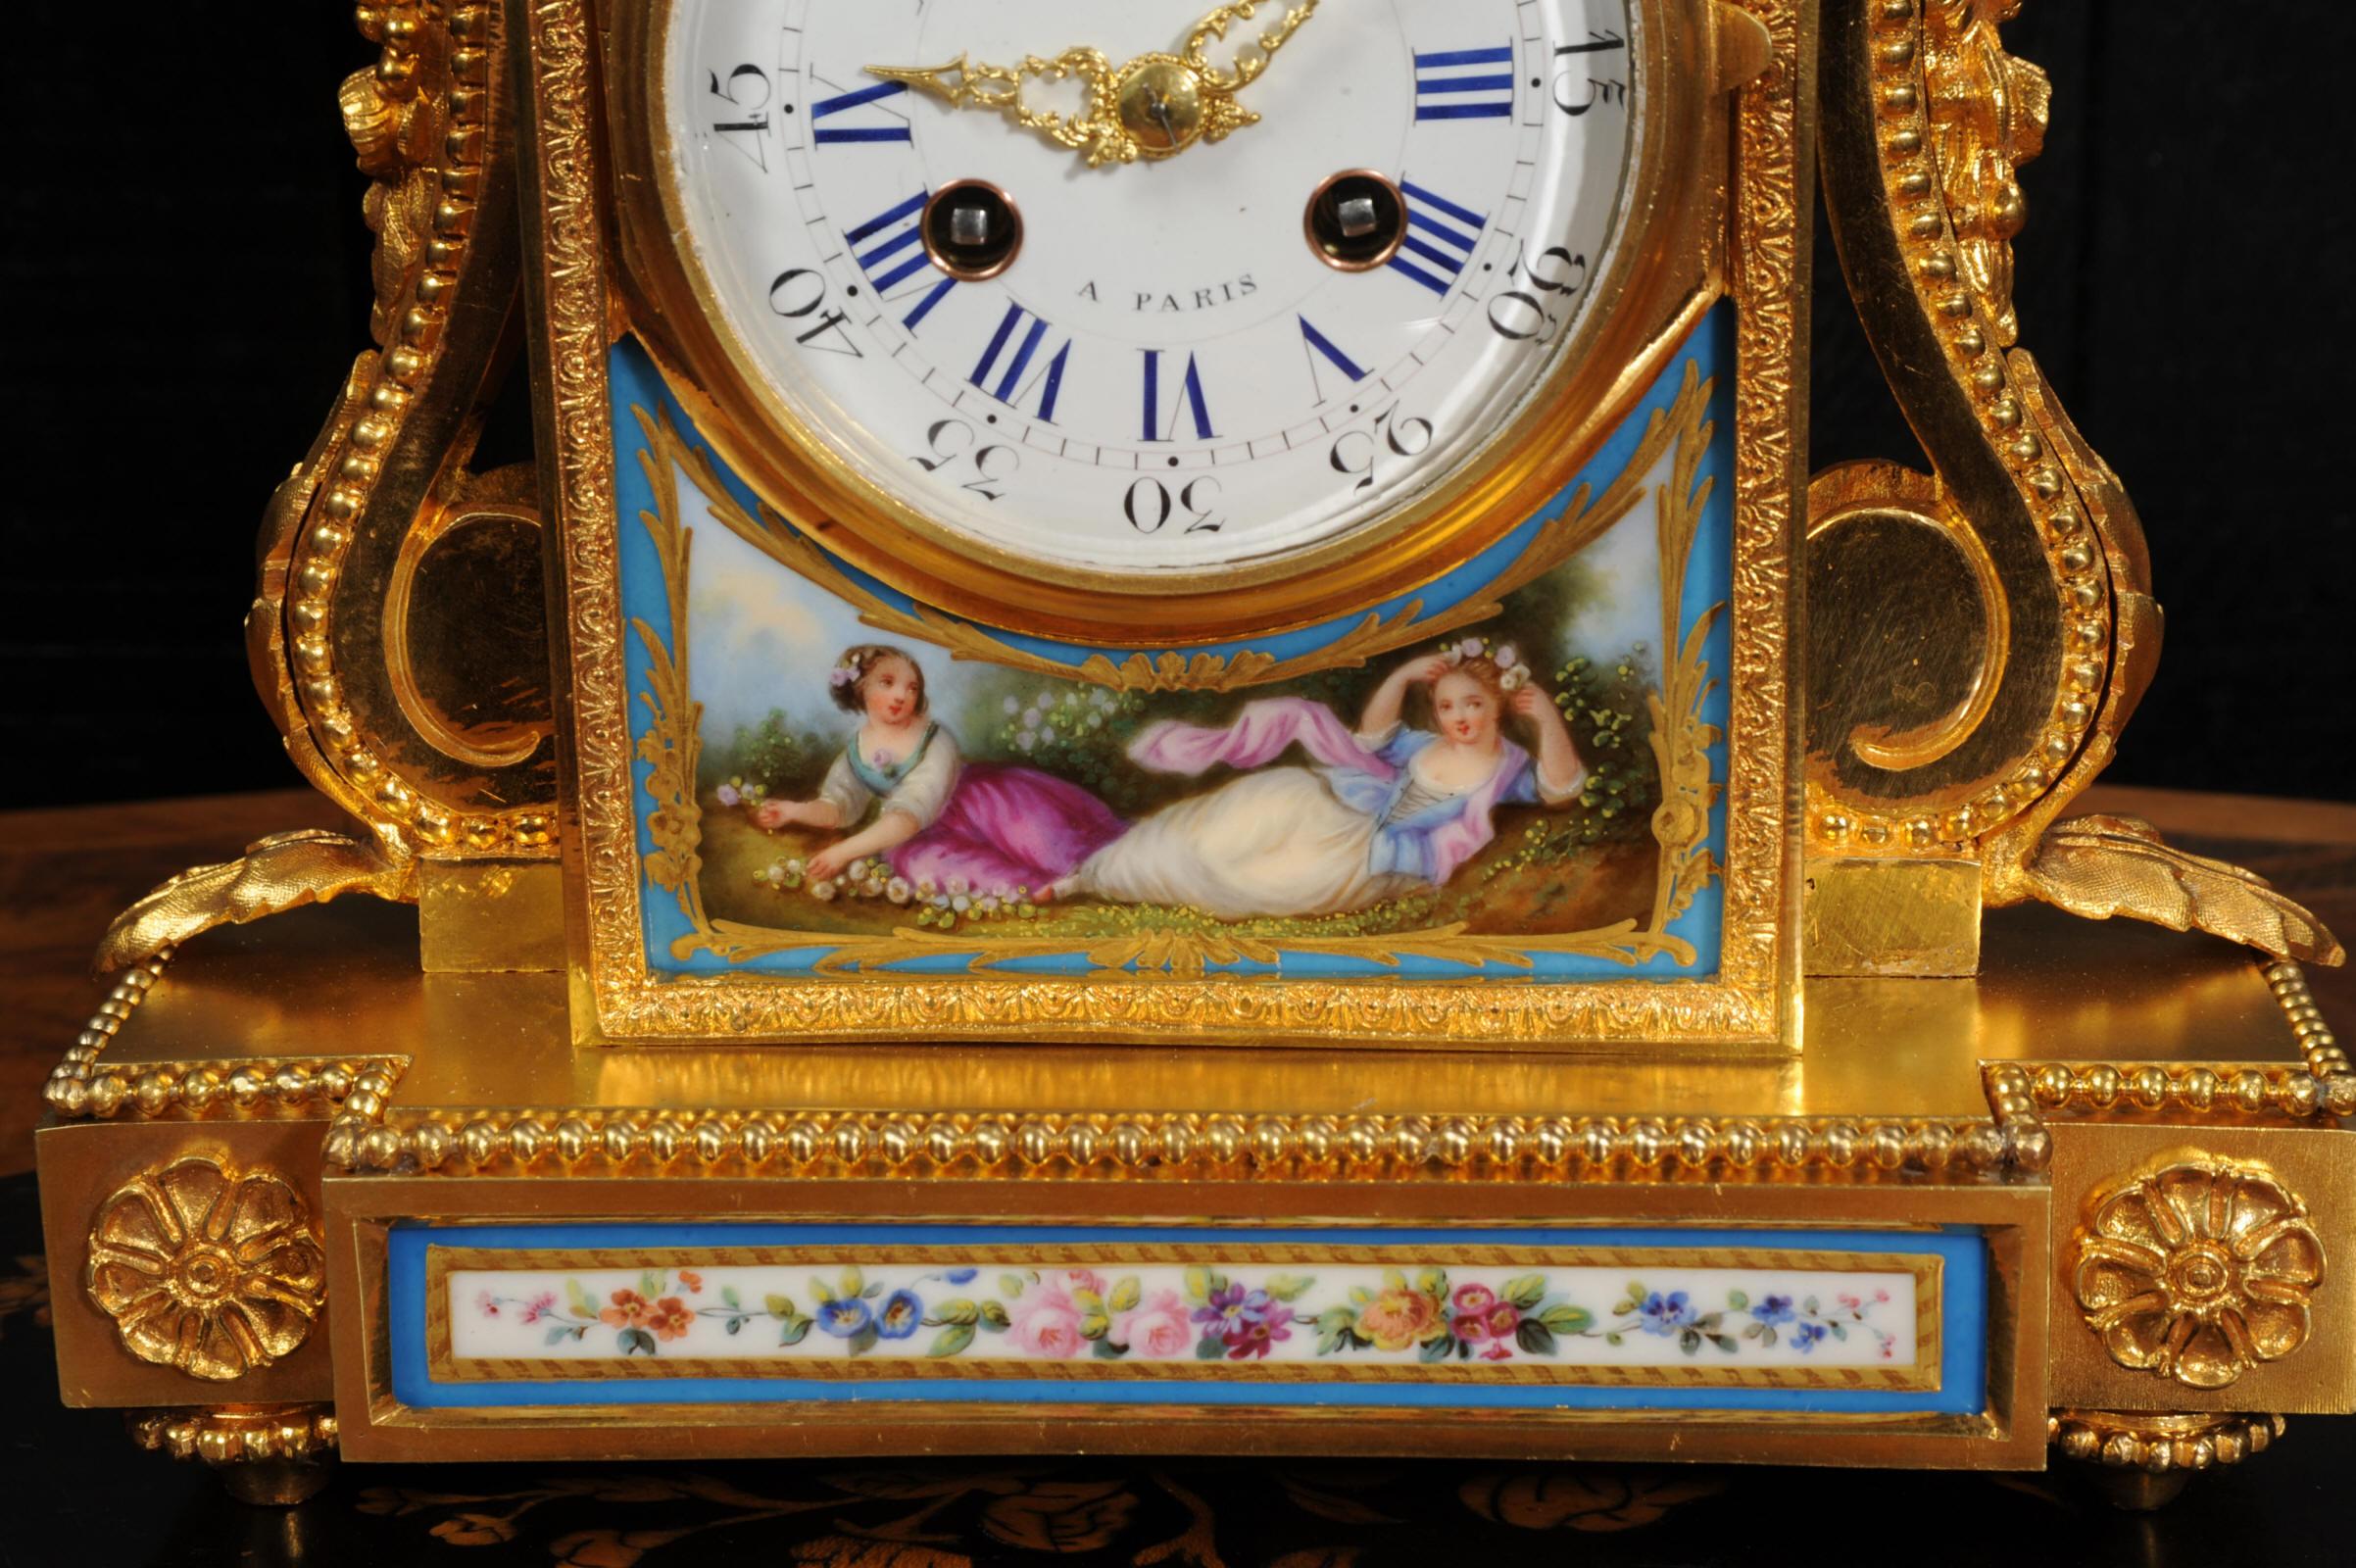 Painted Fine and Early Sevres Porcelain and Ormolu Antique French Clock